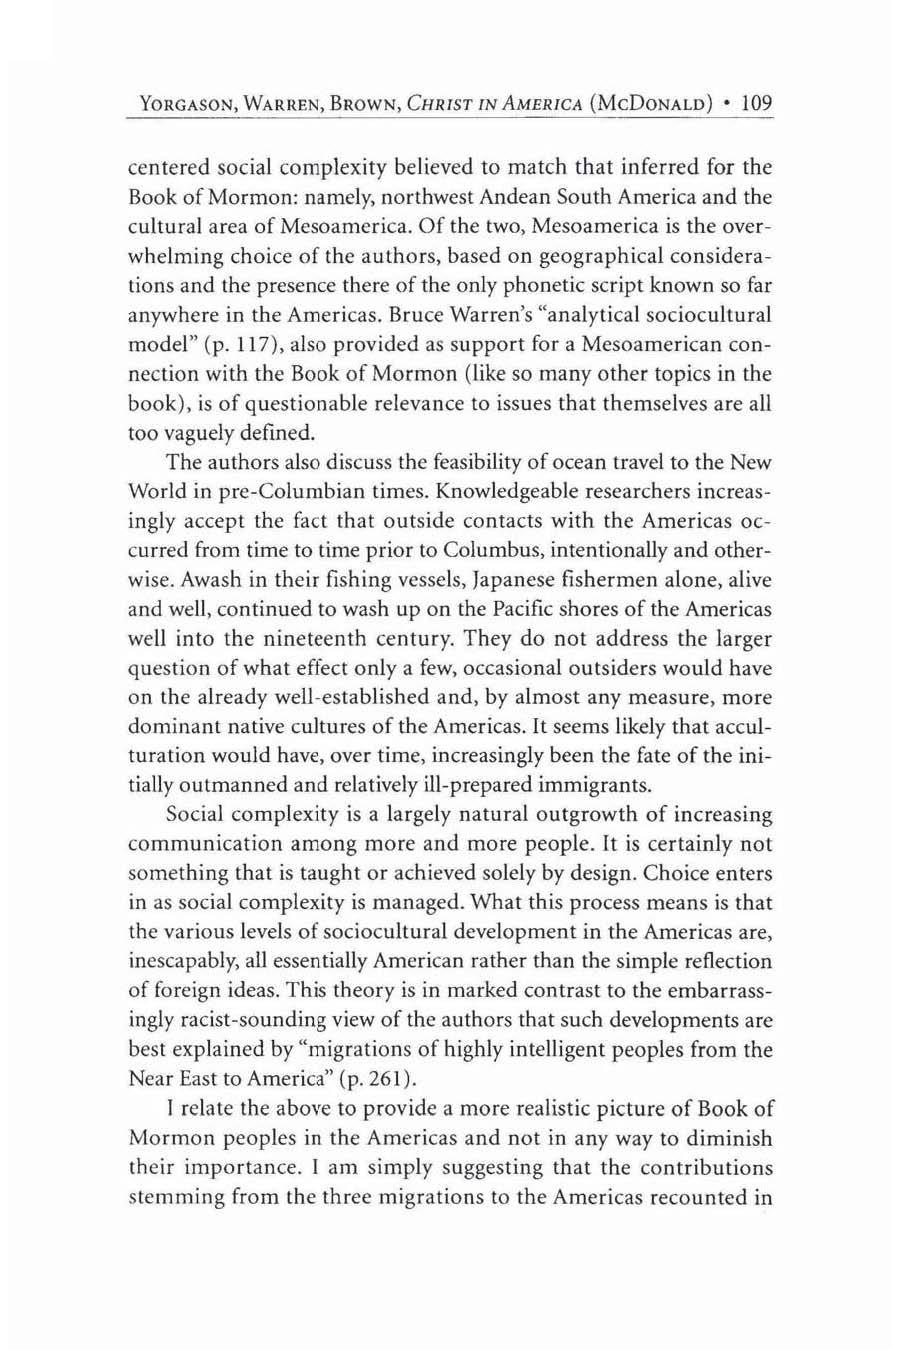 YORGASON, WARREN, BROWN, CHR IST IN AMERICA (McDoNALD) 109 cen tered social complexity believed to match tha t inferred for the Book of Mormon: namely, northwest Andean South America and the cultu ra